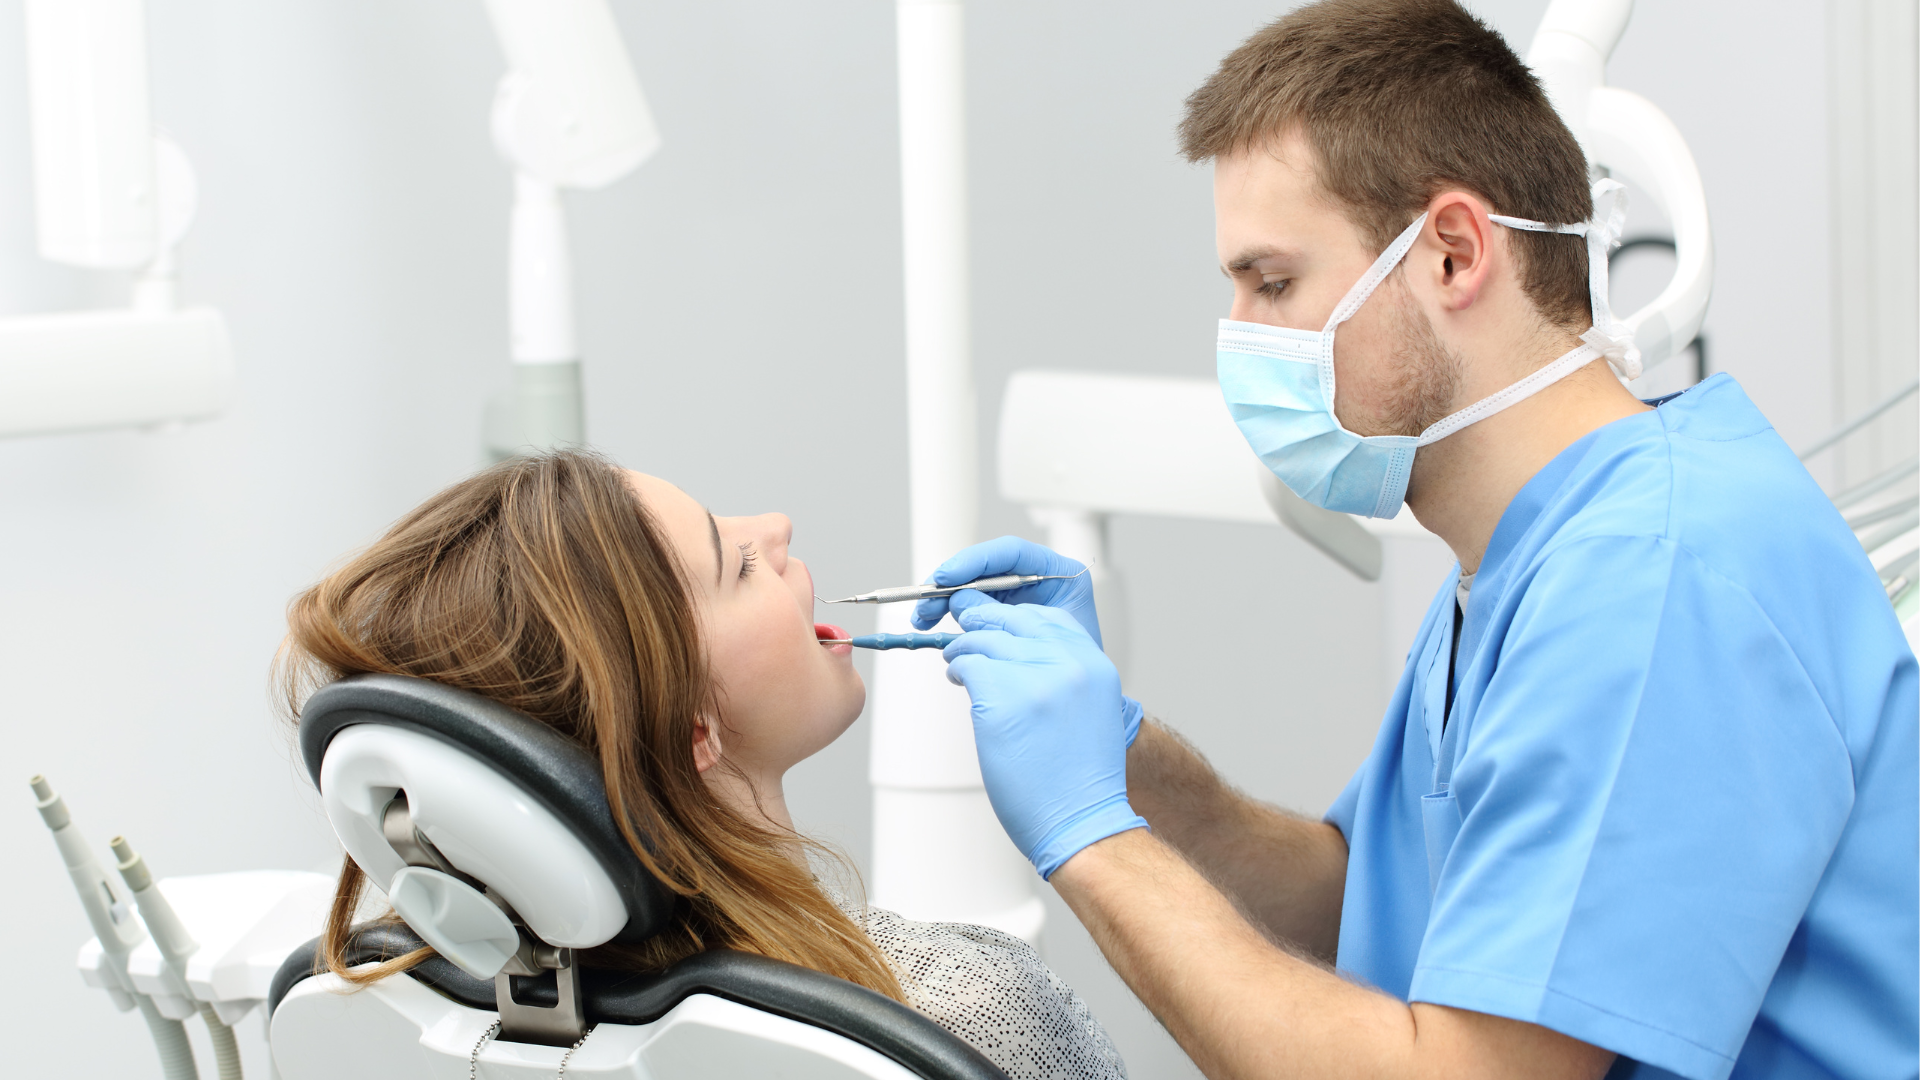 Dentist looking at patient's mouth